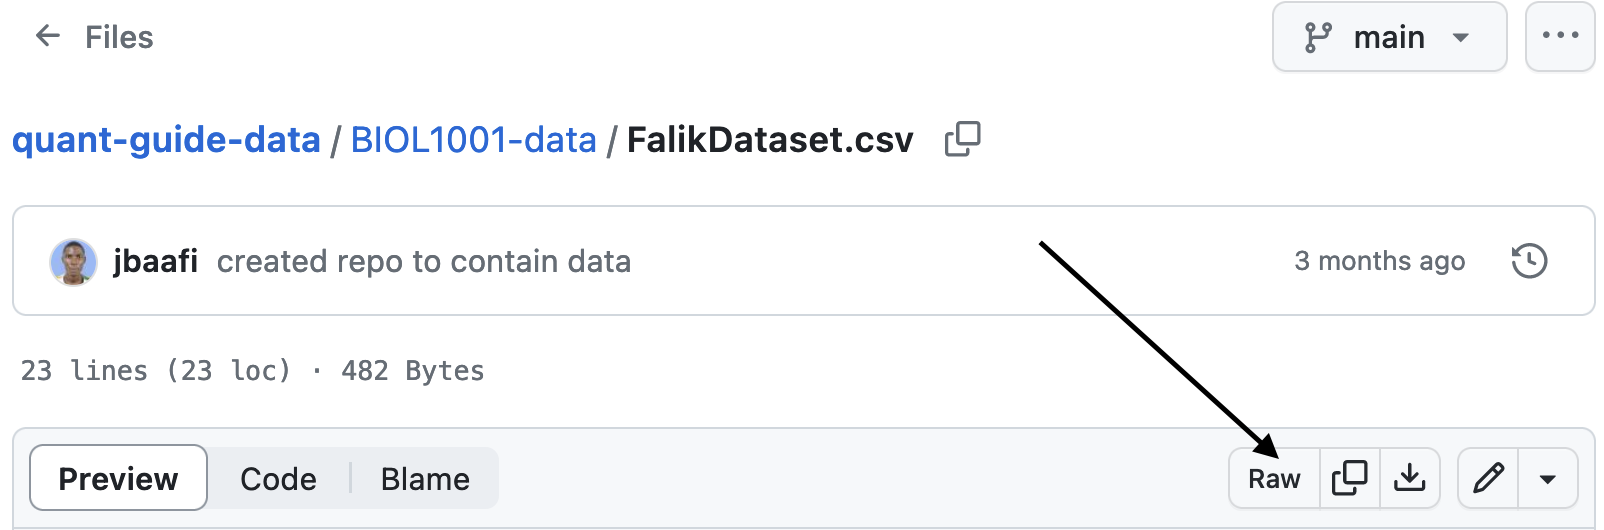 The raw button for data hosted on Github.